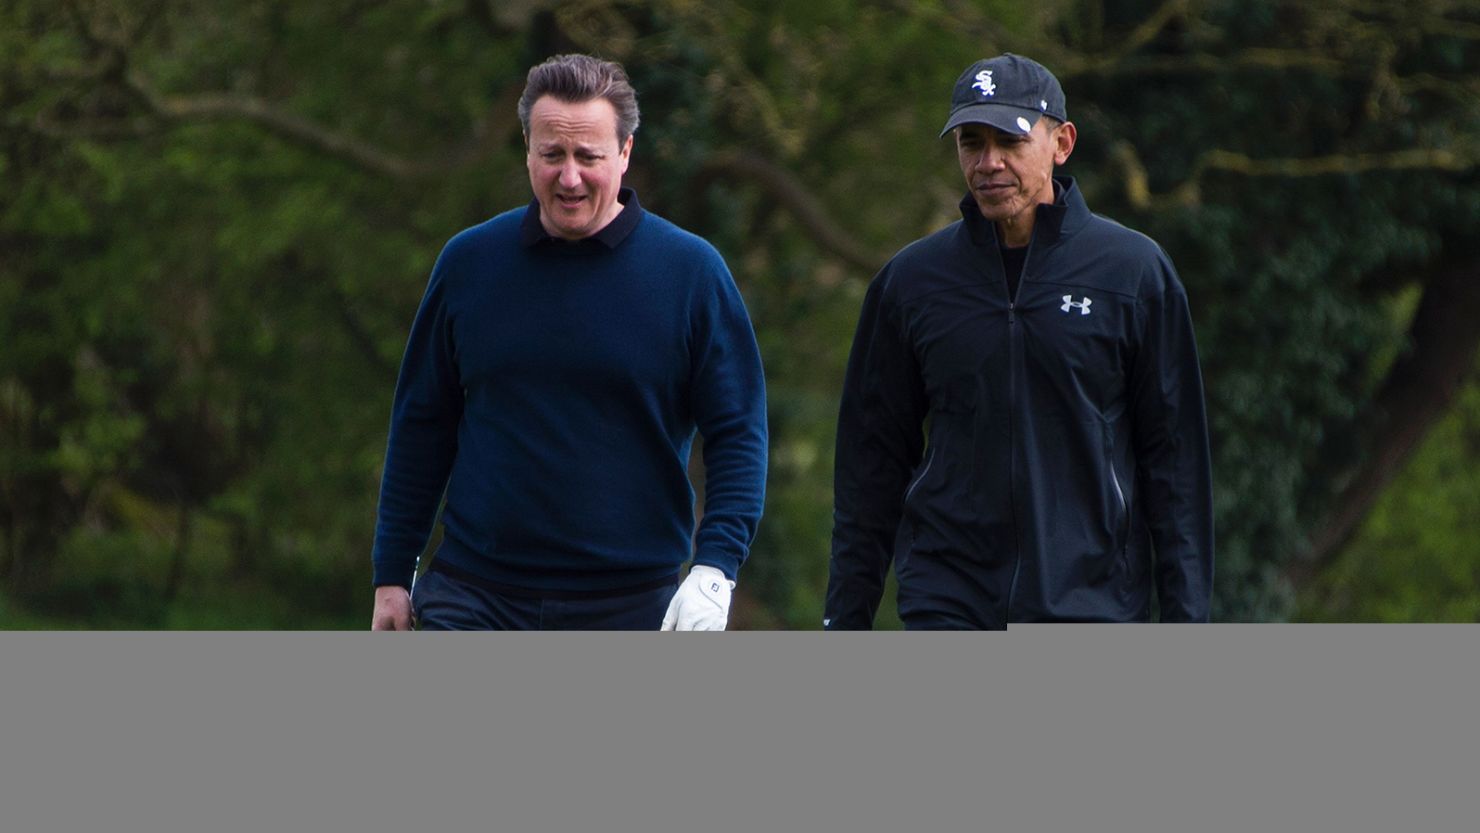 US President Barack Obama (R) talks with British Prime Minister David Cameron (L) as they walk onto the 3rd green at The Grove Golf Course near Watford in Hertfordshire, north of London, on April 23, 2016.  